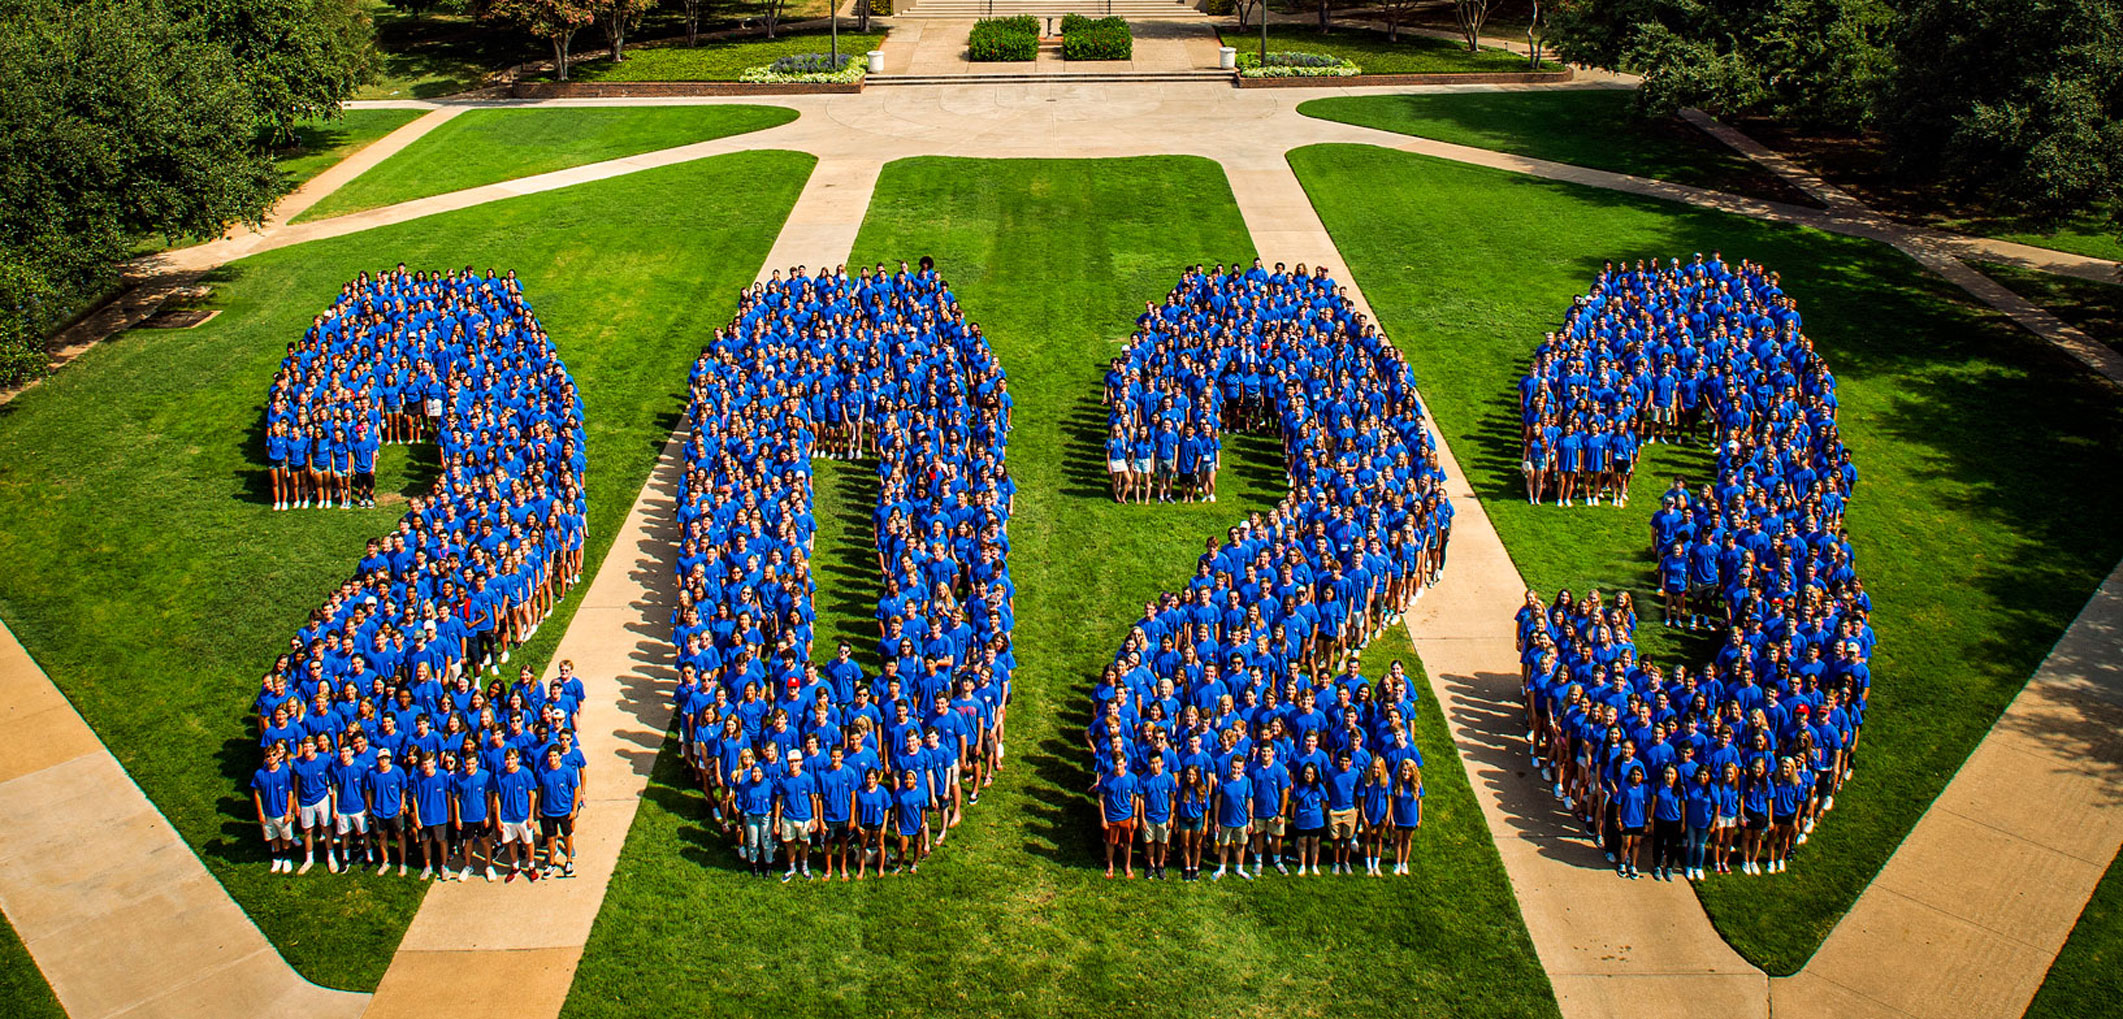 Students standing together to form the shape of "2023" on Dallas Hall Lawn